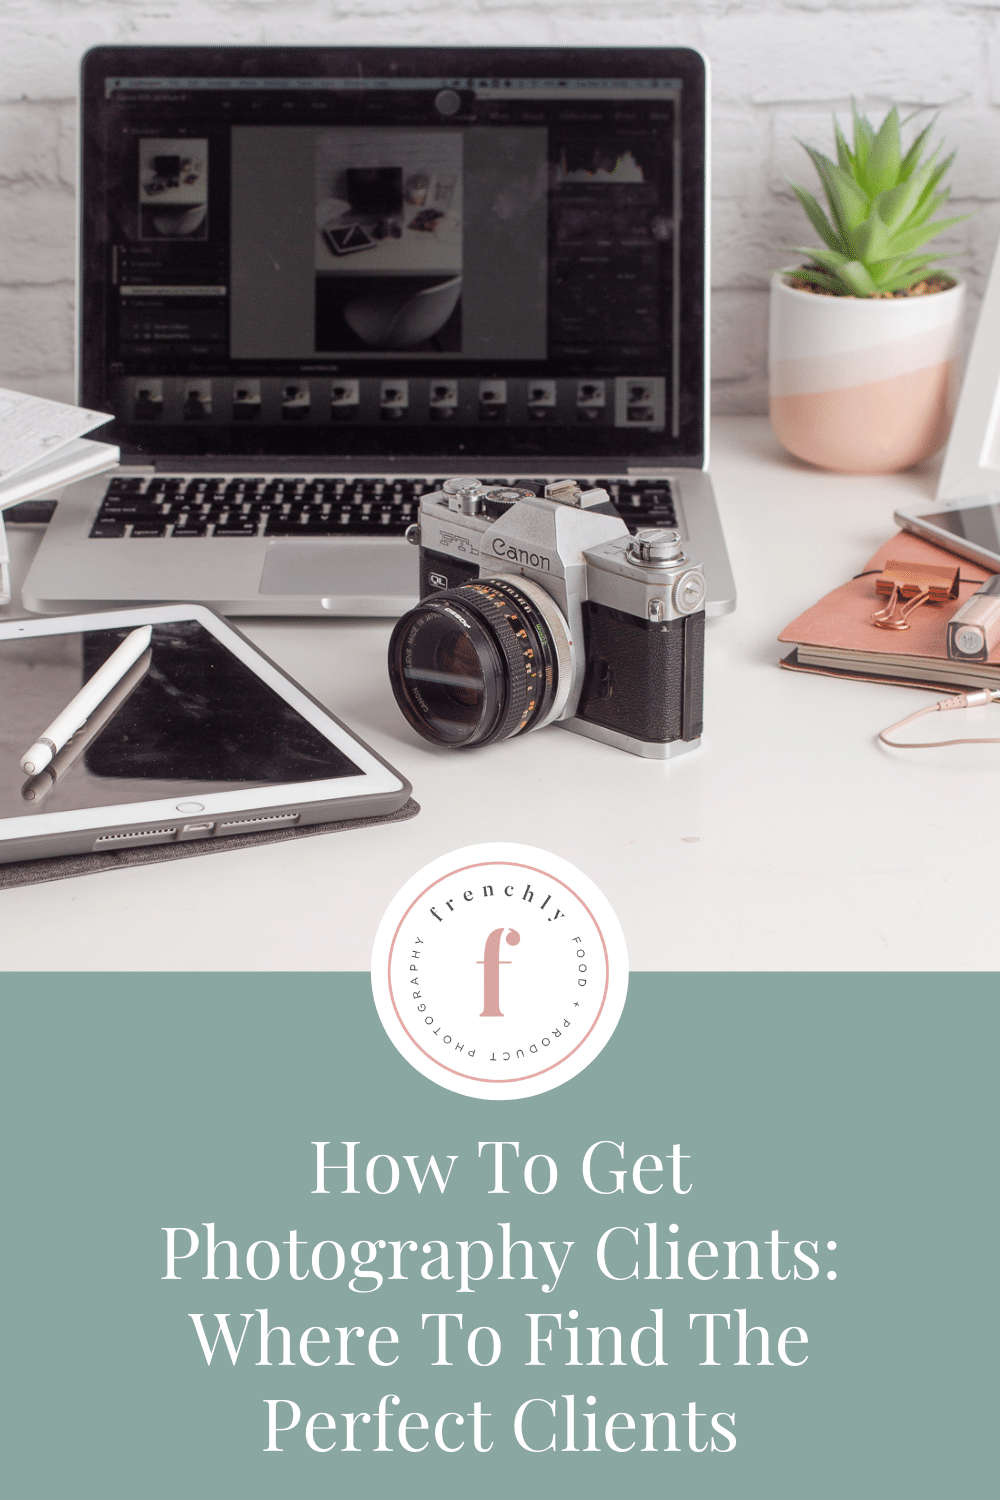 How To Get Photography Clients: Where To Find The Perfect Clients | Frenchly Food + Product Photography